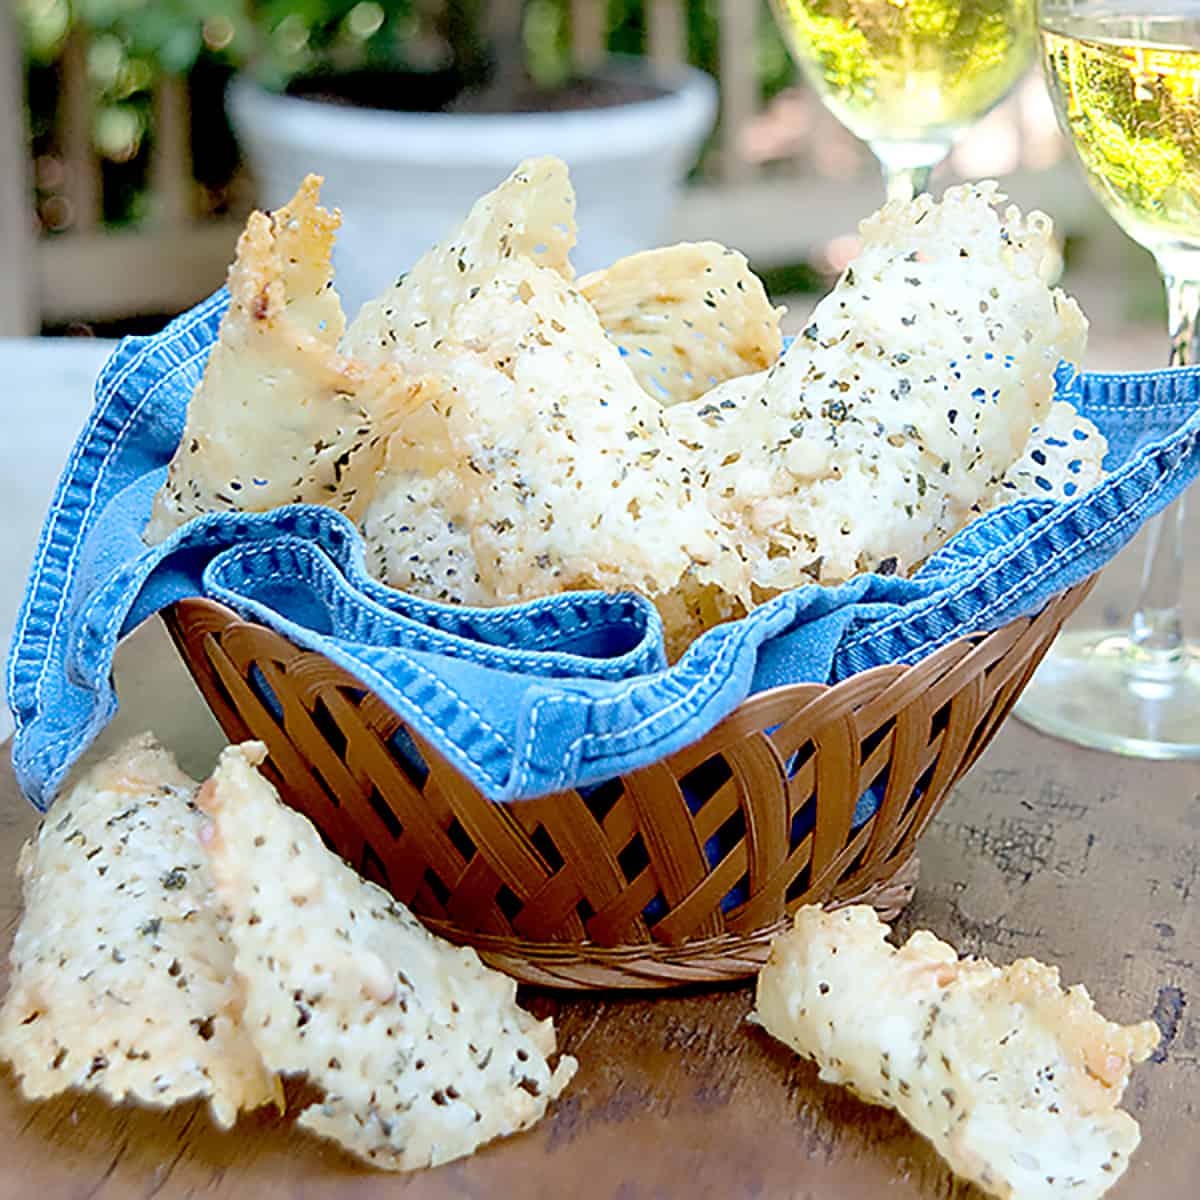 Cheese crisps in a basket with a blue napkin.